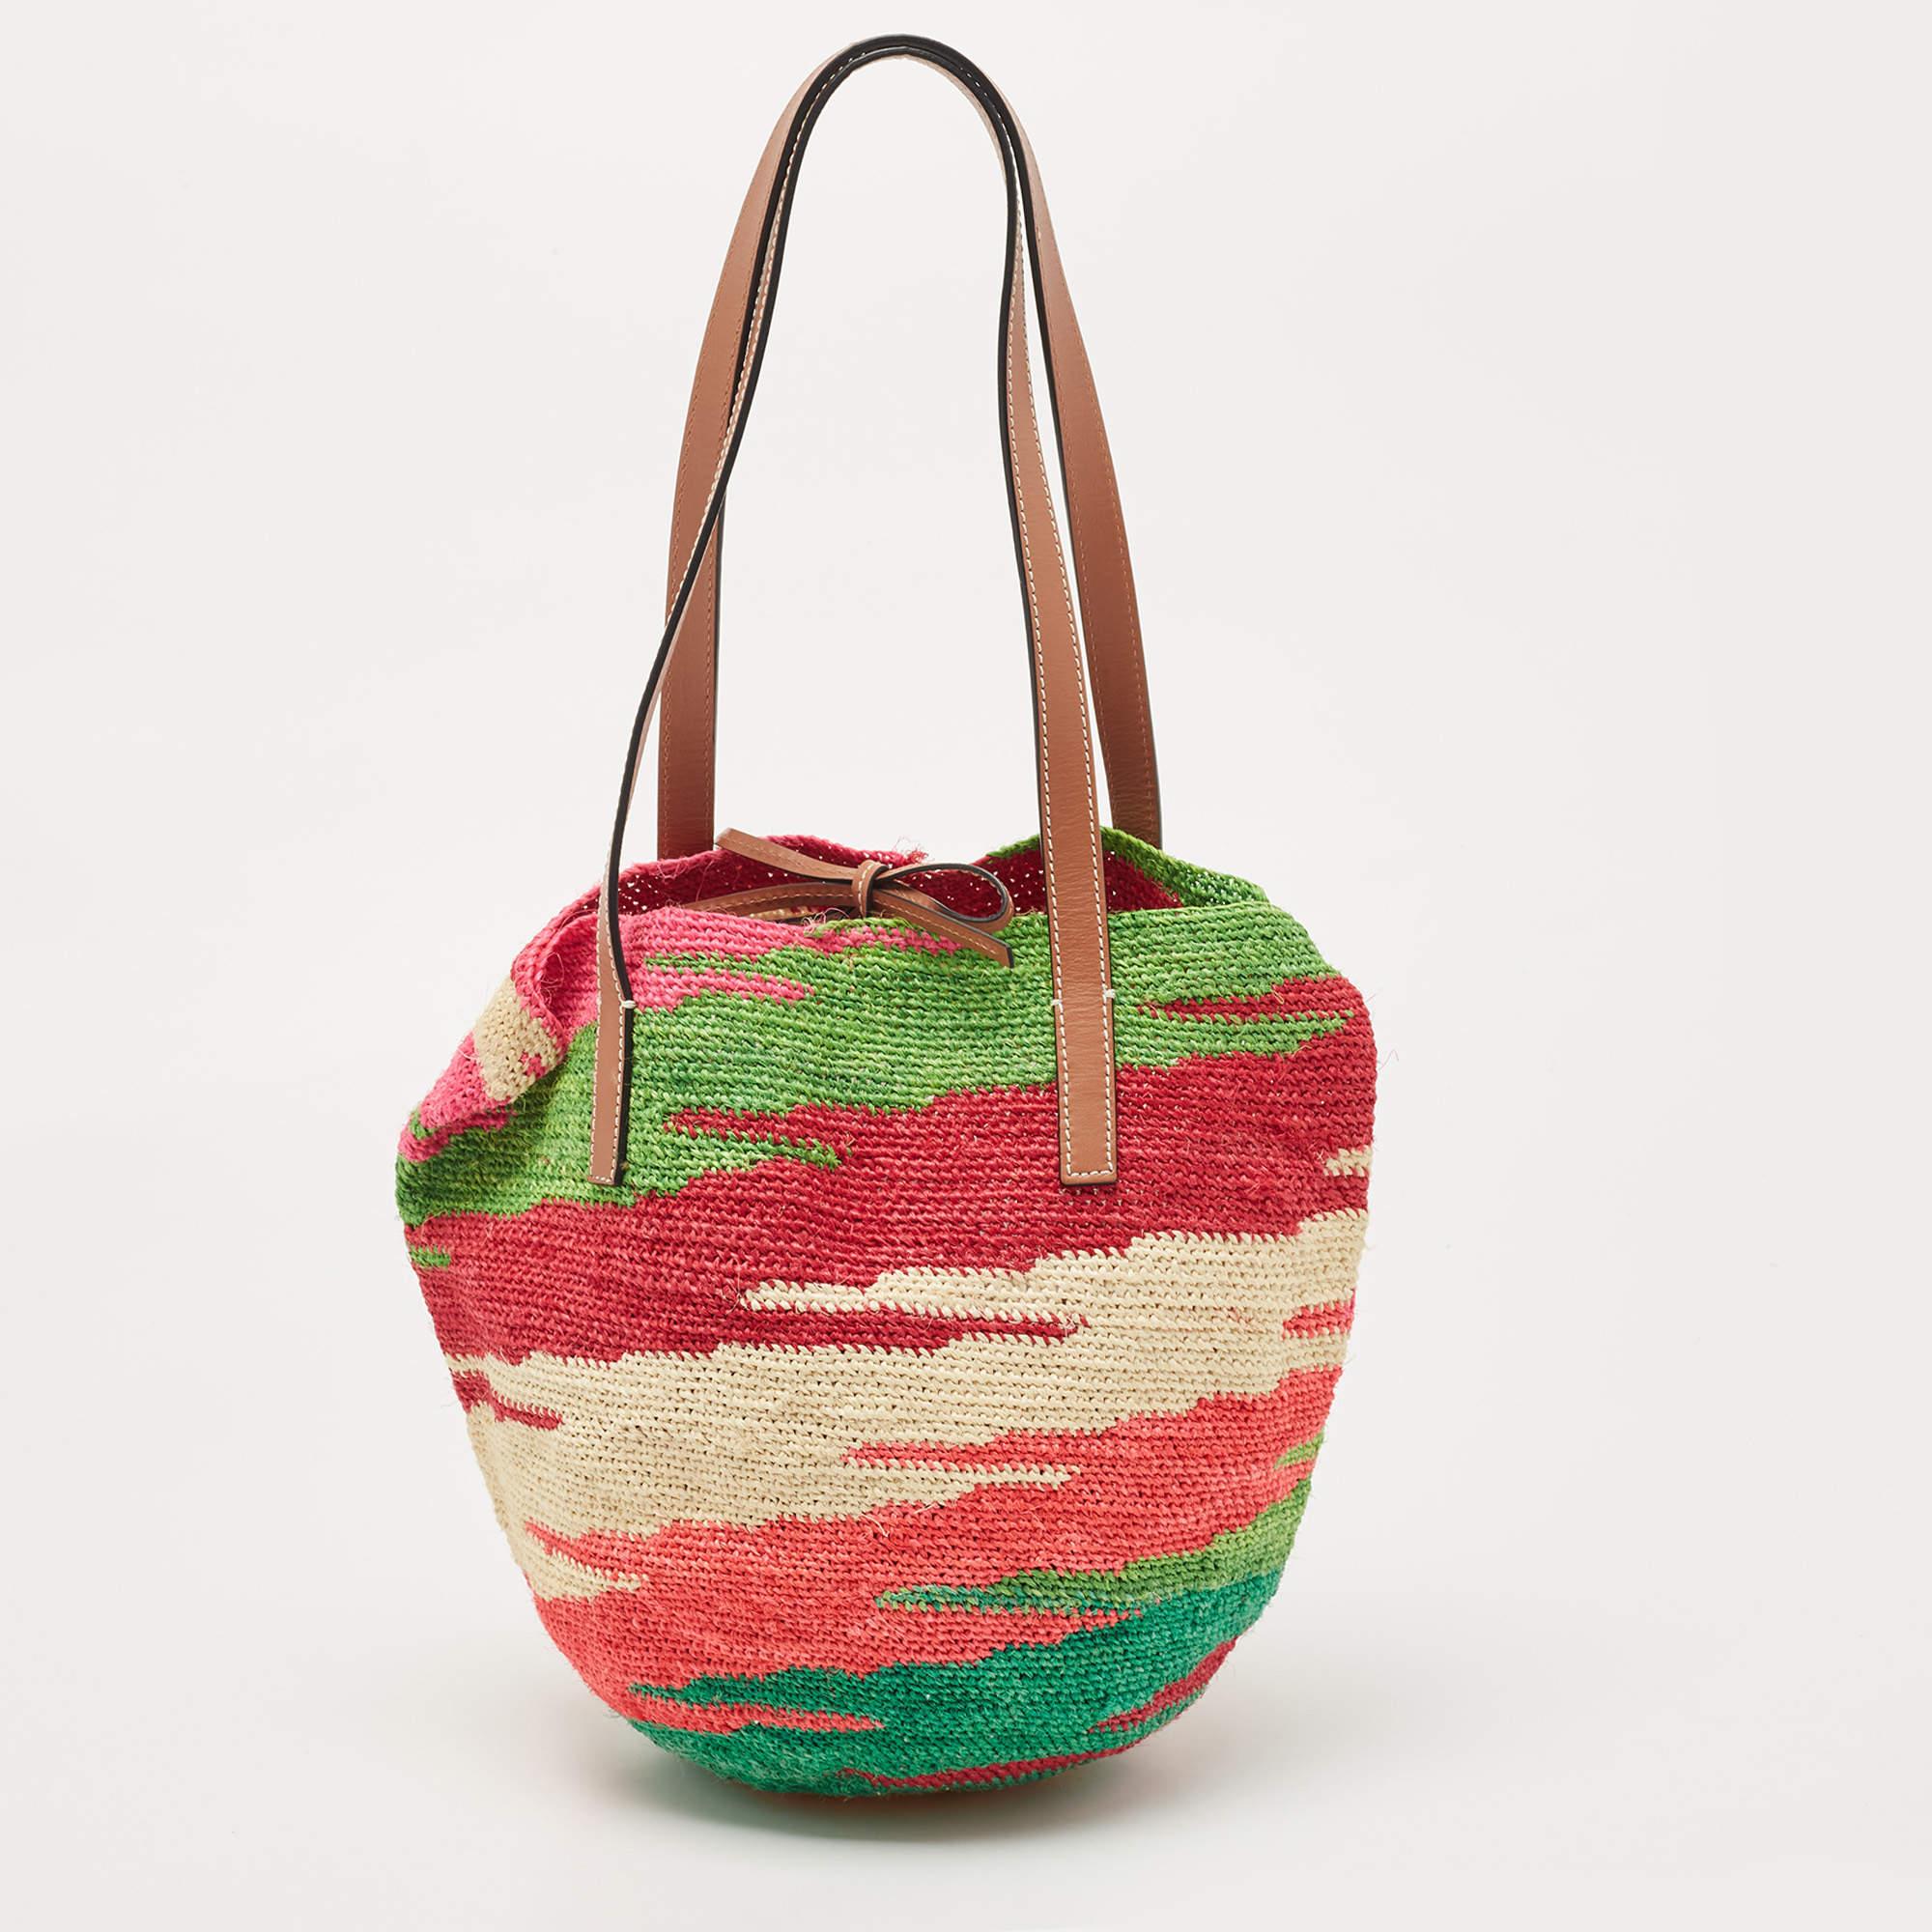 A pretty carryall and one you can carry to brunches with friends or on a lazy day to the park or beach, this LOEWE basket bag will come in handy on many days. It is woven using straw and complemented by leather patches and handles.

Includes: